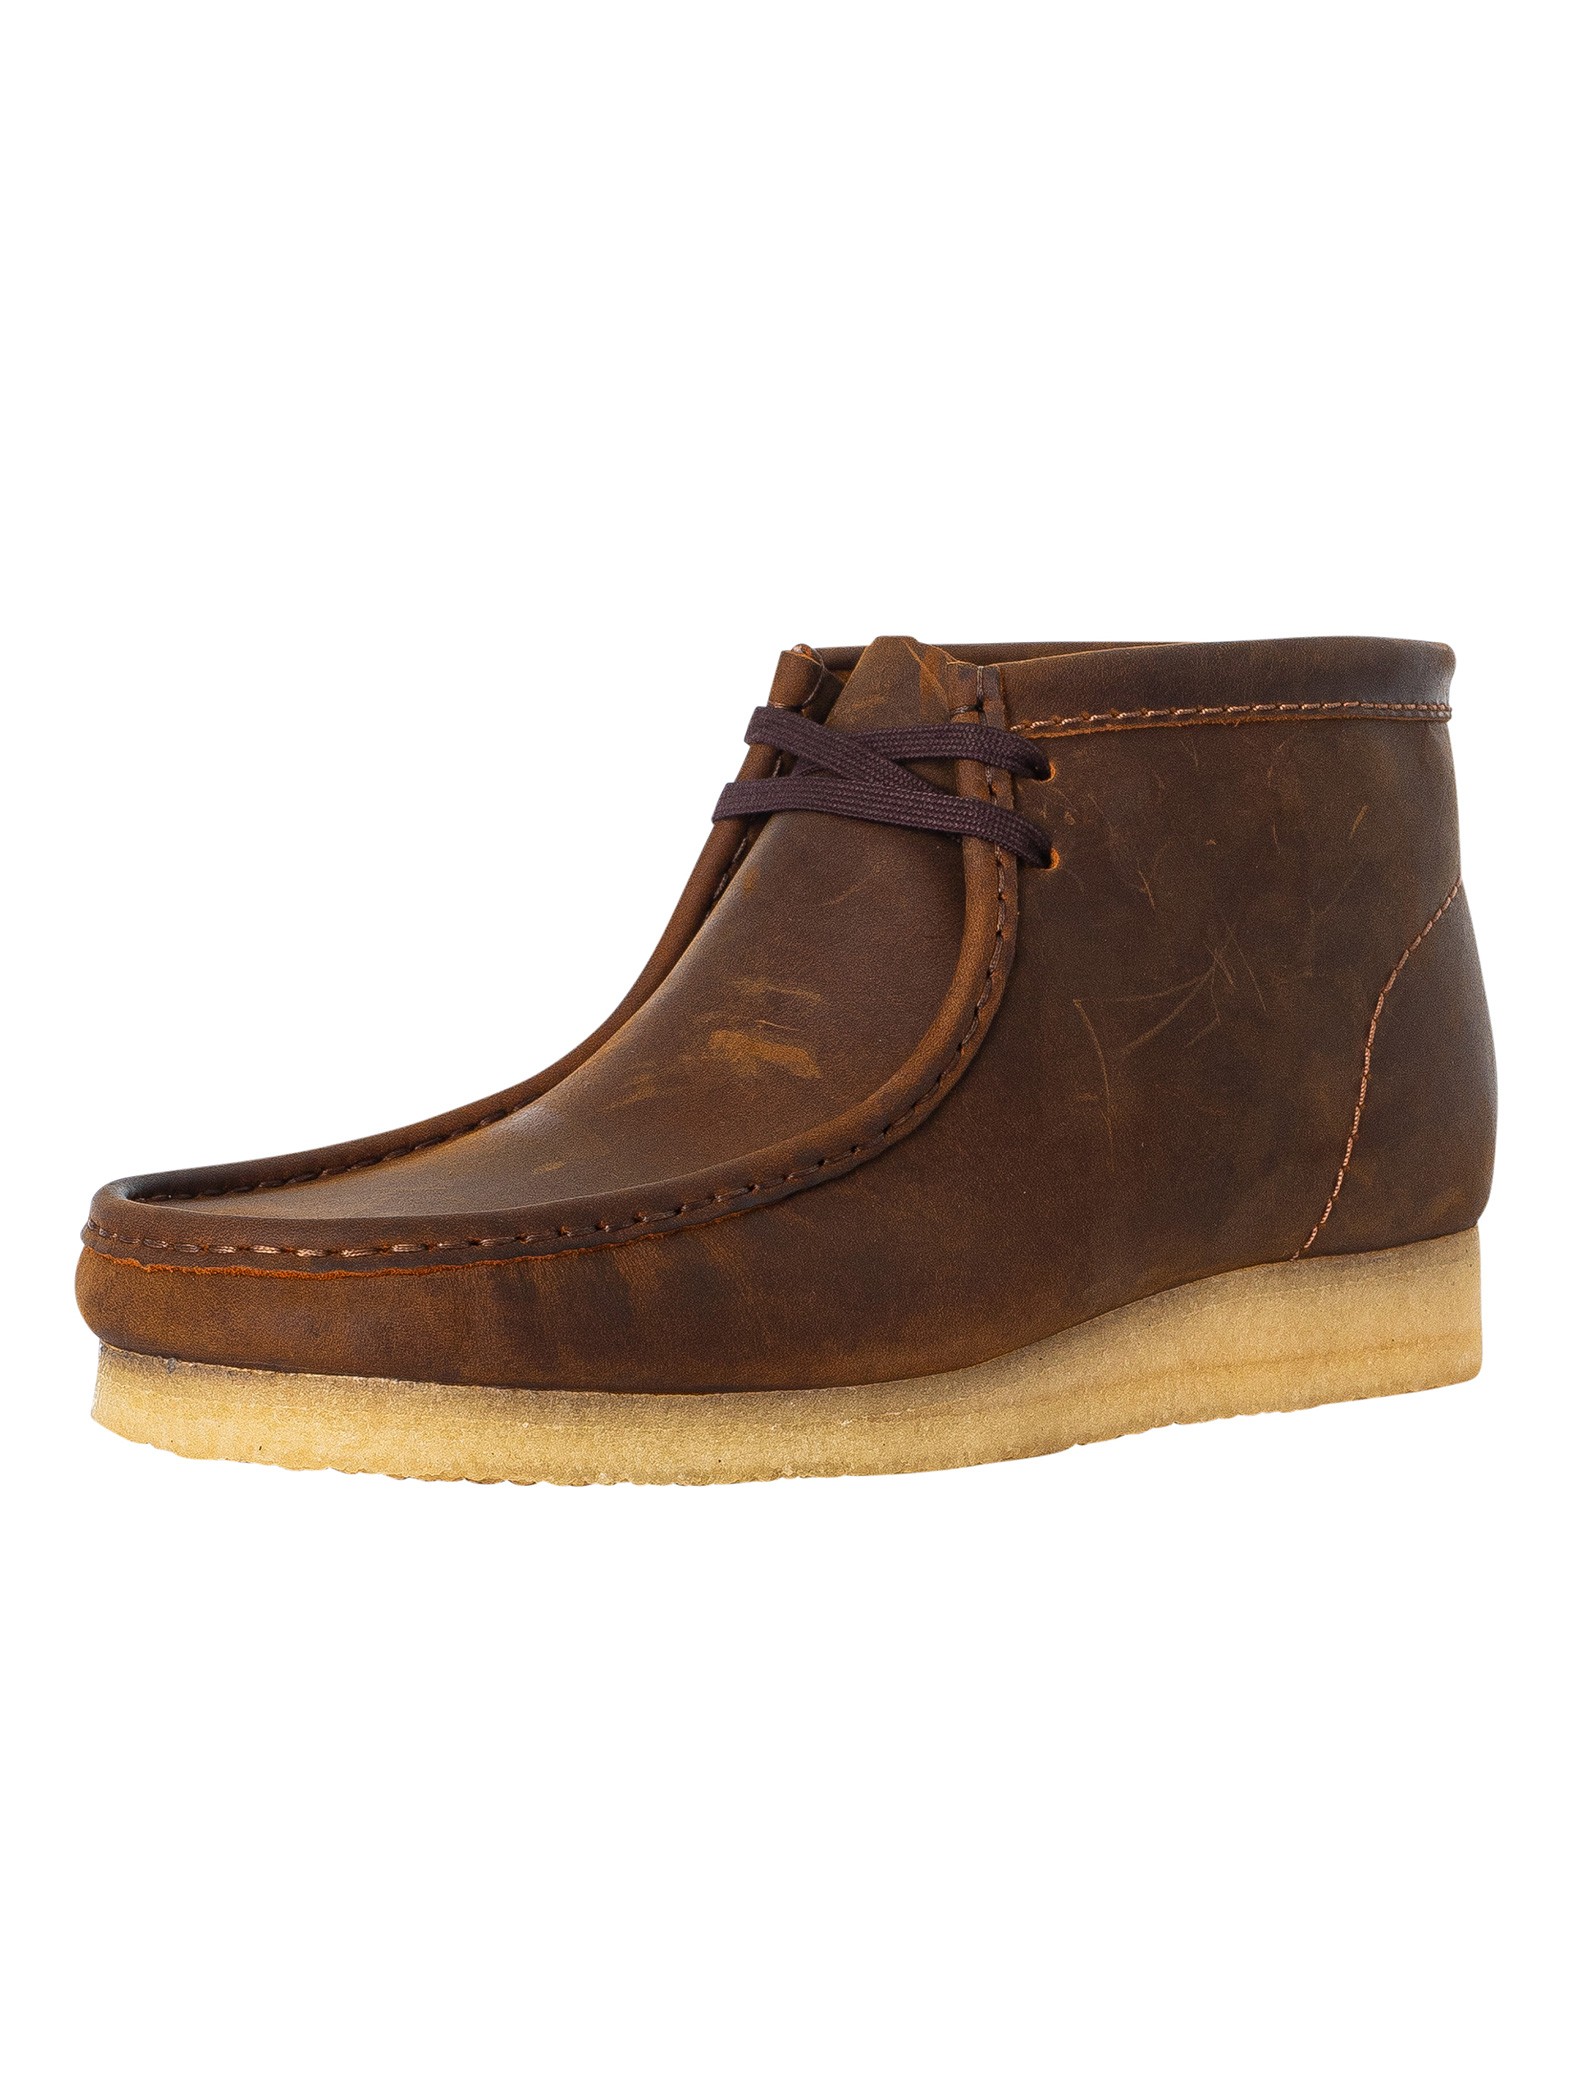 Wallabee Leather Boots product